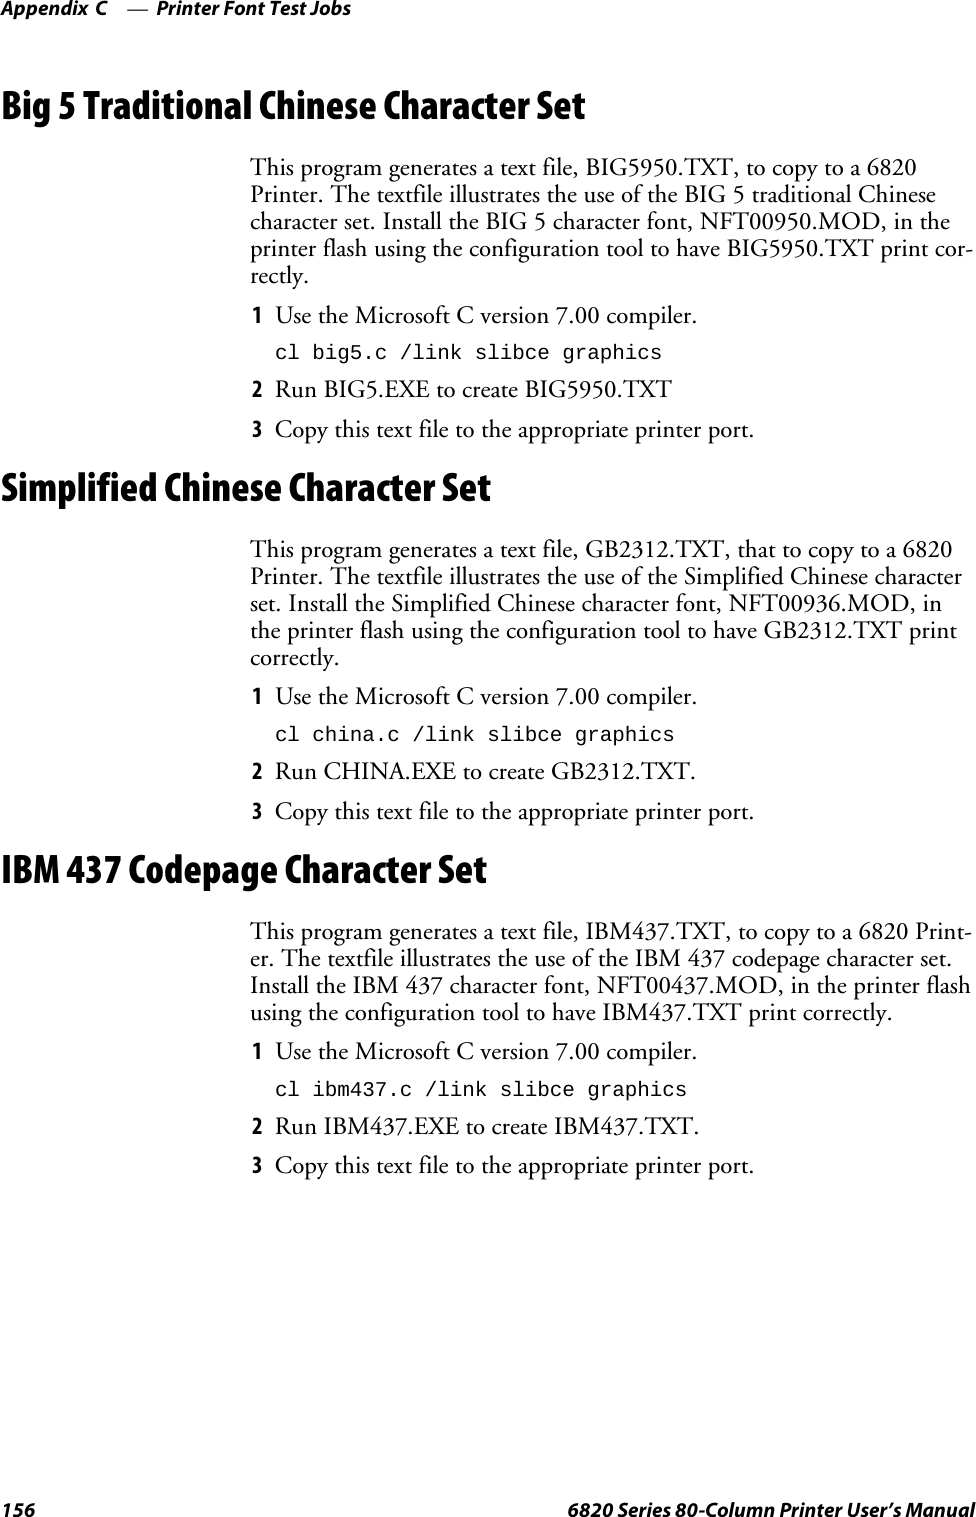 Printer Font Test JobsAppendix —C156 6820 Series 80-Column Printer User’s ManualBig 5 Traditional Chinese Character SetThis program generates a text file, BIG5950.TXT, to copy to a 6820Printer. The textfile illustrates the use of the BIG 5 traditional Chinesecharacter set. Install the BIG 5 character font, NFT00950.MOD, in theprinter flash using the configuration tool to have BIG5950.TXT print cor-rectly.1Use the Microsoft C version 7.00 compiler.cl big5.c /link slibce graphics2Run BIG5.EXE to create BIG5950.TXT3Copy this text file to the appropriate printer port.Simplified Chinese Character SetThis program generates a text file, GB2312.TXT, that to copy to a 6820Printer.ThetextfileillustratestheuseoftheSimplifiedChinesecharacterset. Install the Simplified Chinese character font, NFT00936.MOD, inthe printer flash using the configuration tool to have GB2312.TXT printcorrectly.1Use the Microsoft C version 7.00 compiler.cl china.c /link slibce graphics2Run CHINA.EXE to create GB2312.TXT.3Copy this text file to the appropriate printer port.IBM 437 Codepage Character SetThis program generates a text file, IBM437.TXT, to copy to a 6820 Print-er. The textfile illustrates the use of the IBM 437 codepage character set.Install the IBM 437 character font, NFT00437.MOD, in the printer flashusing the configuration tool to have IBM437.TXT print correctly.1Use the Microsoft C version 7.00 compiler.cl ibm437.c /link slibce graphics2Run IBM437.EXE to create IBM437.TXT.3Copy this text file to the appropriate printer port.